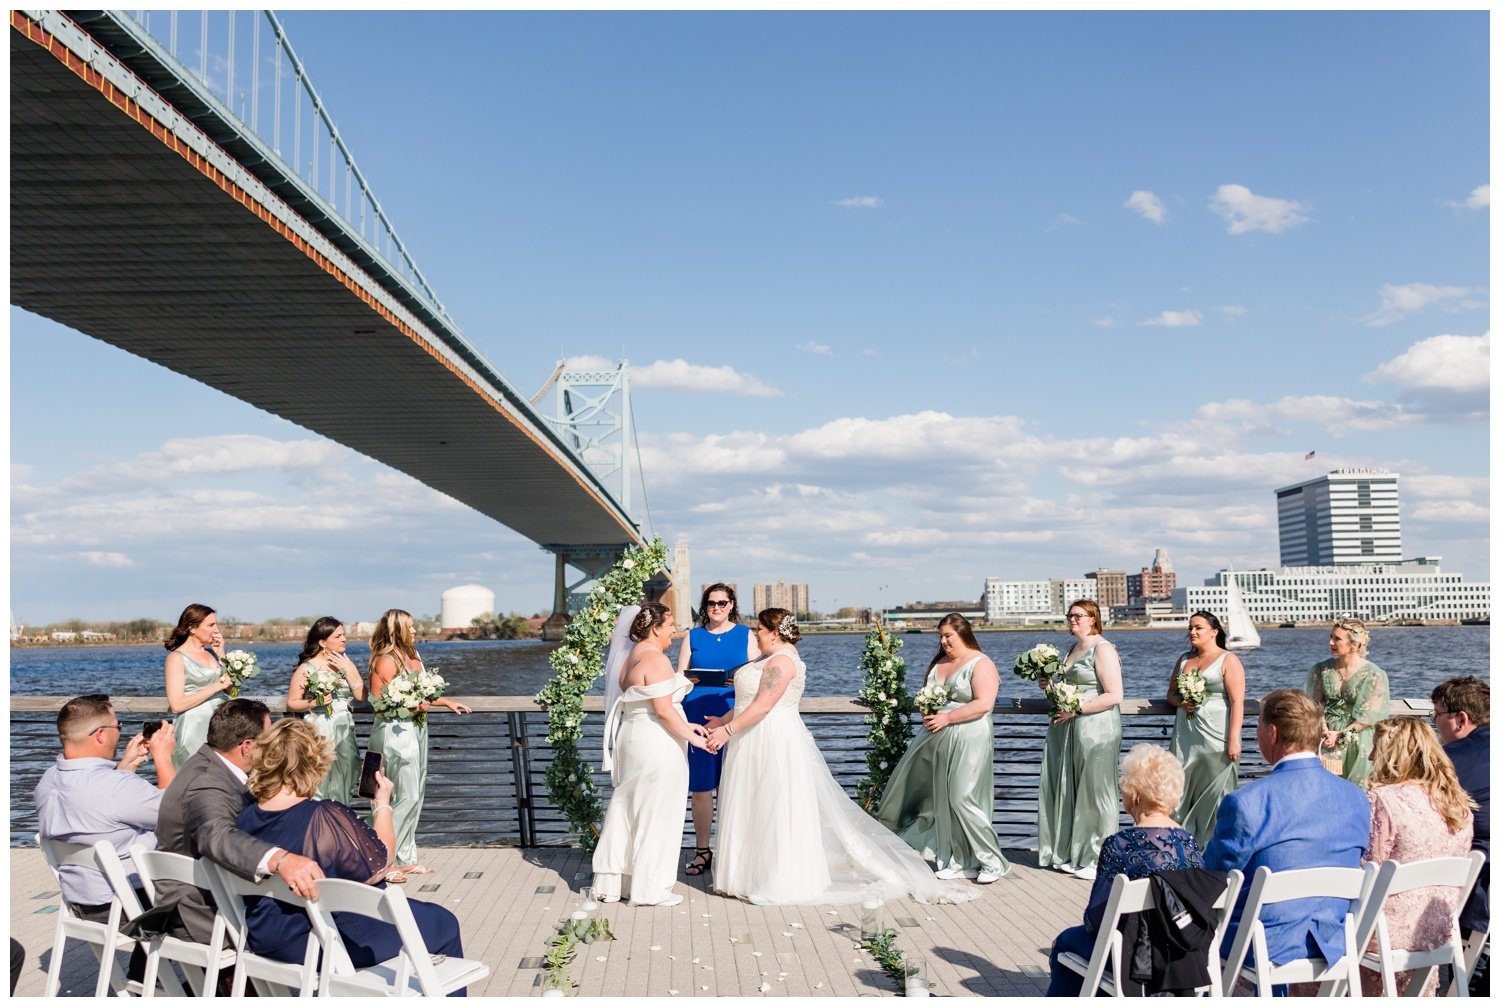 Race-Street-Pier-and-Yards-Brewing-Compnay-Philly-LGBT-Wedding-26.jpg